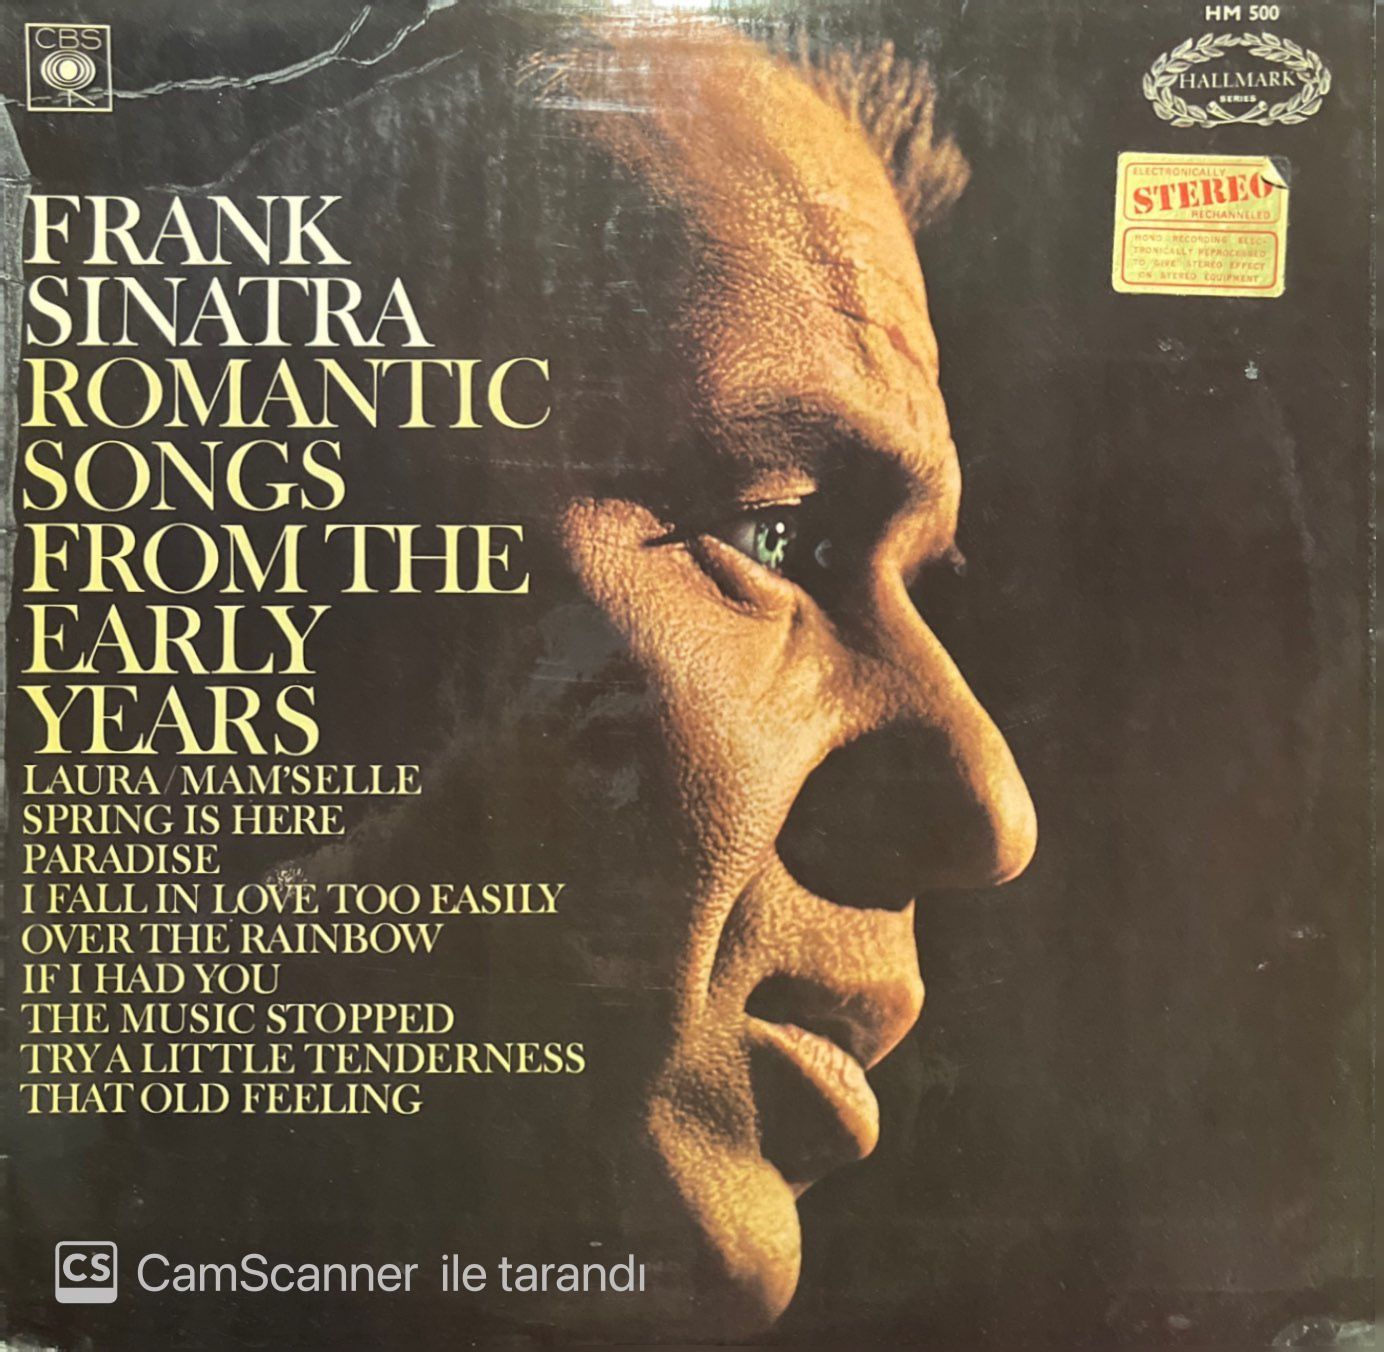 Frank Sinatra Romantic Songs From The Early Years LP Plak